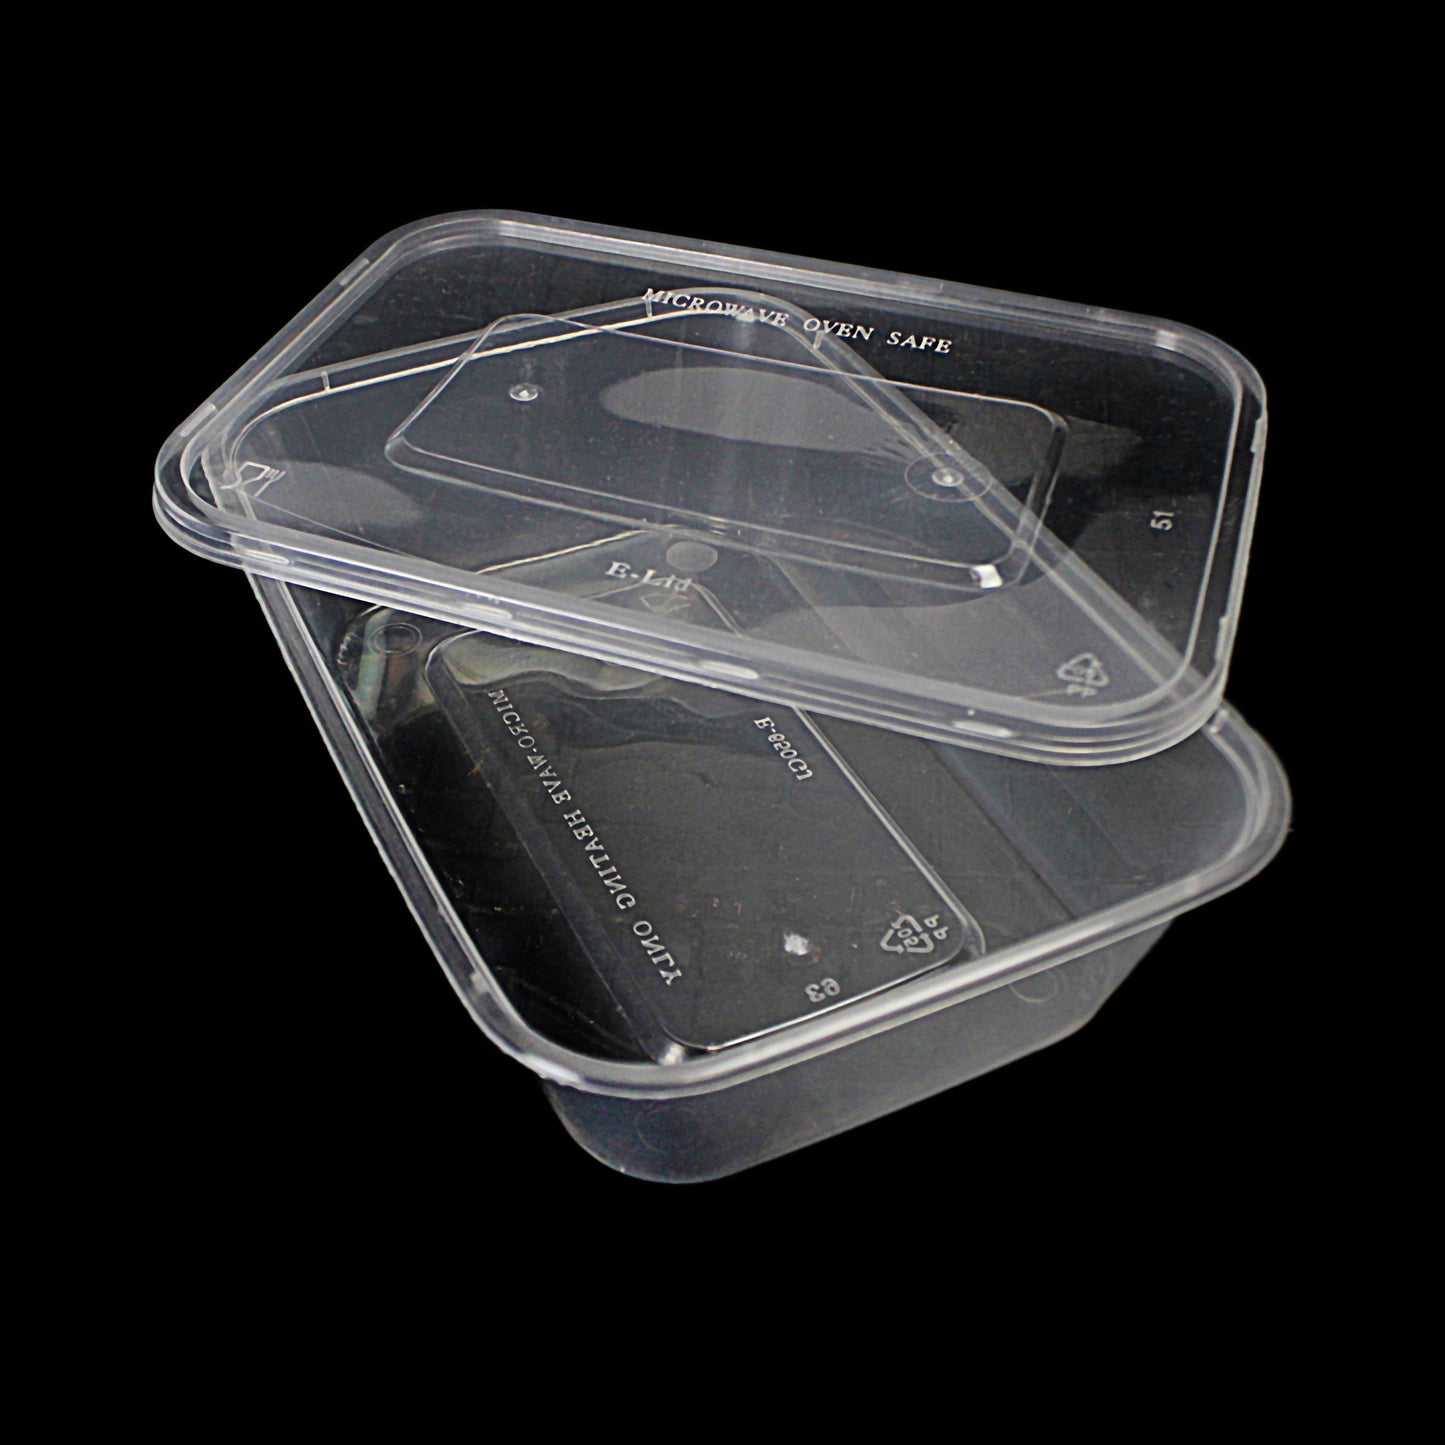 Plastic Food Takeaway Containers Oven and Microwave Safe 500ml 6 Pack 718338 (Parcel Rate)